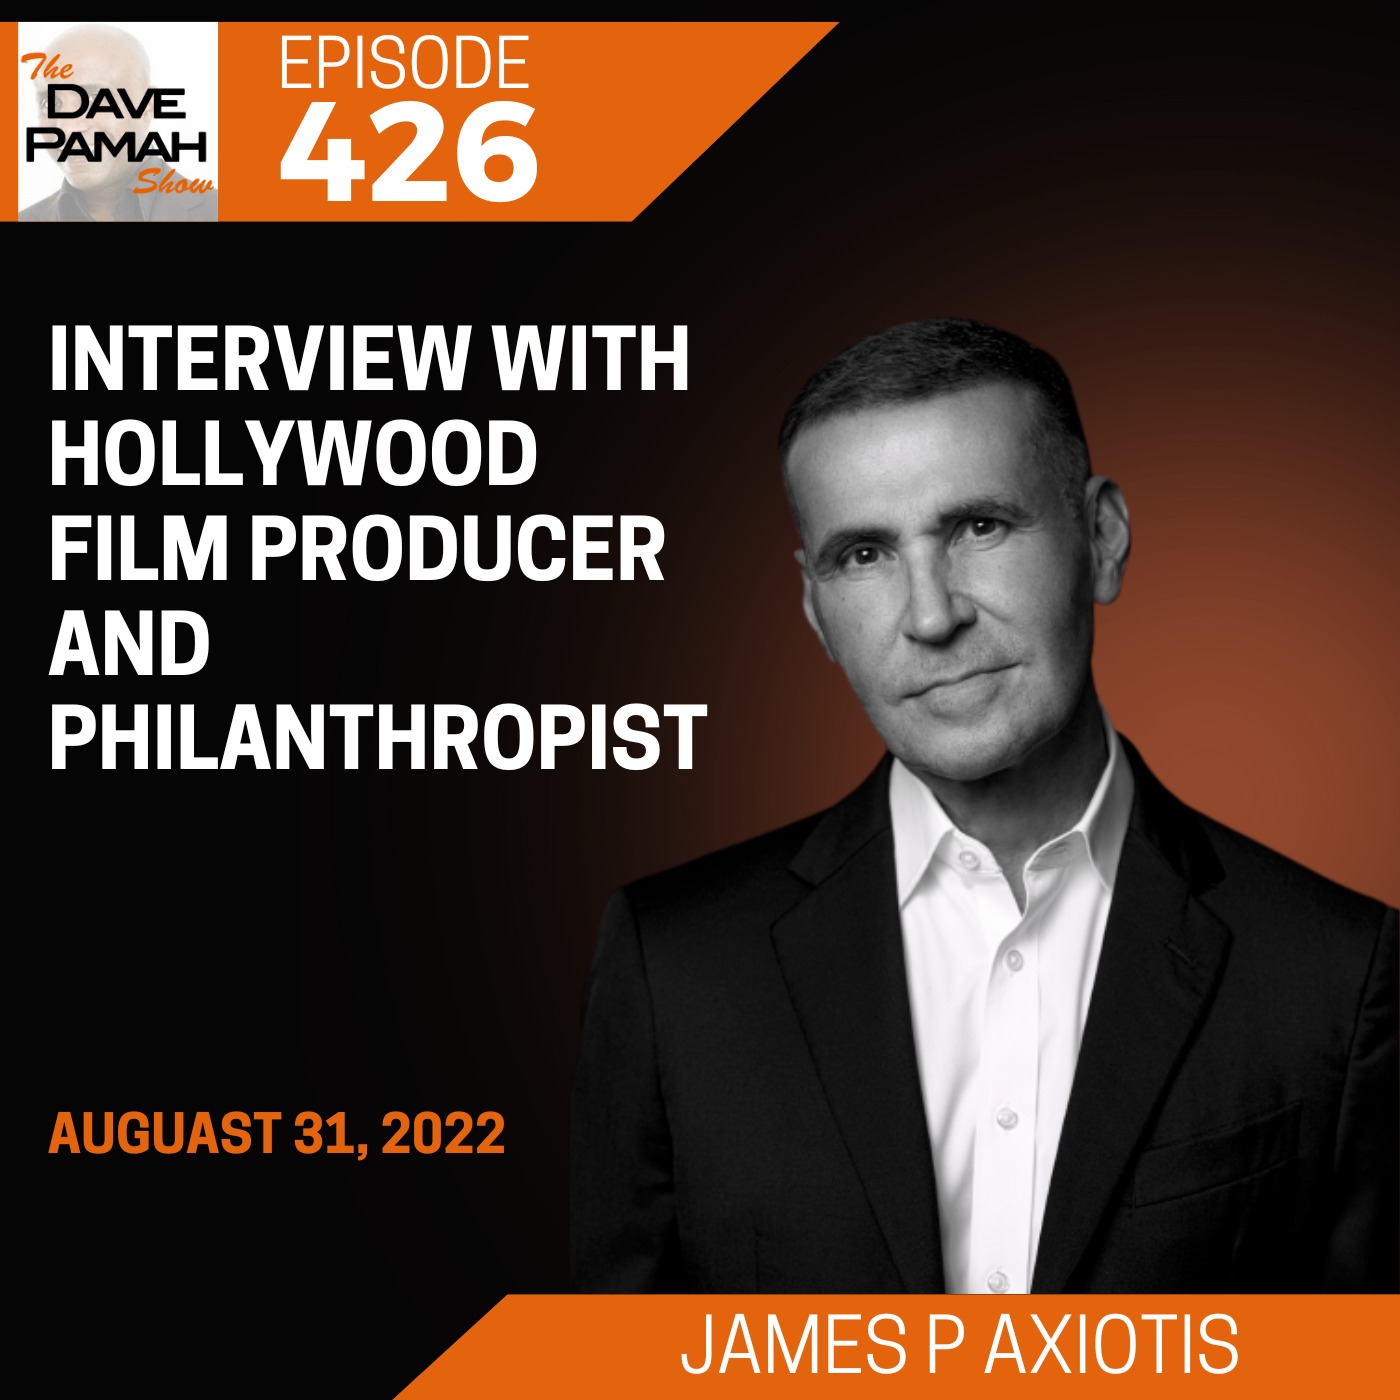 Interview with Hollywood film producer and philanthropist James P Axiotis